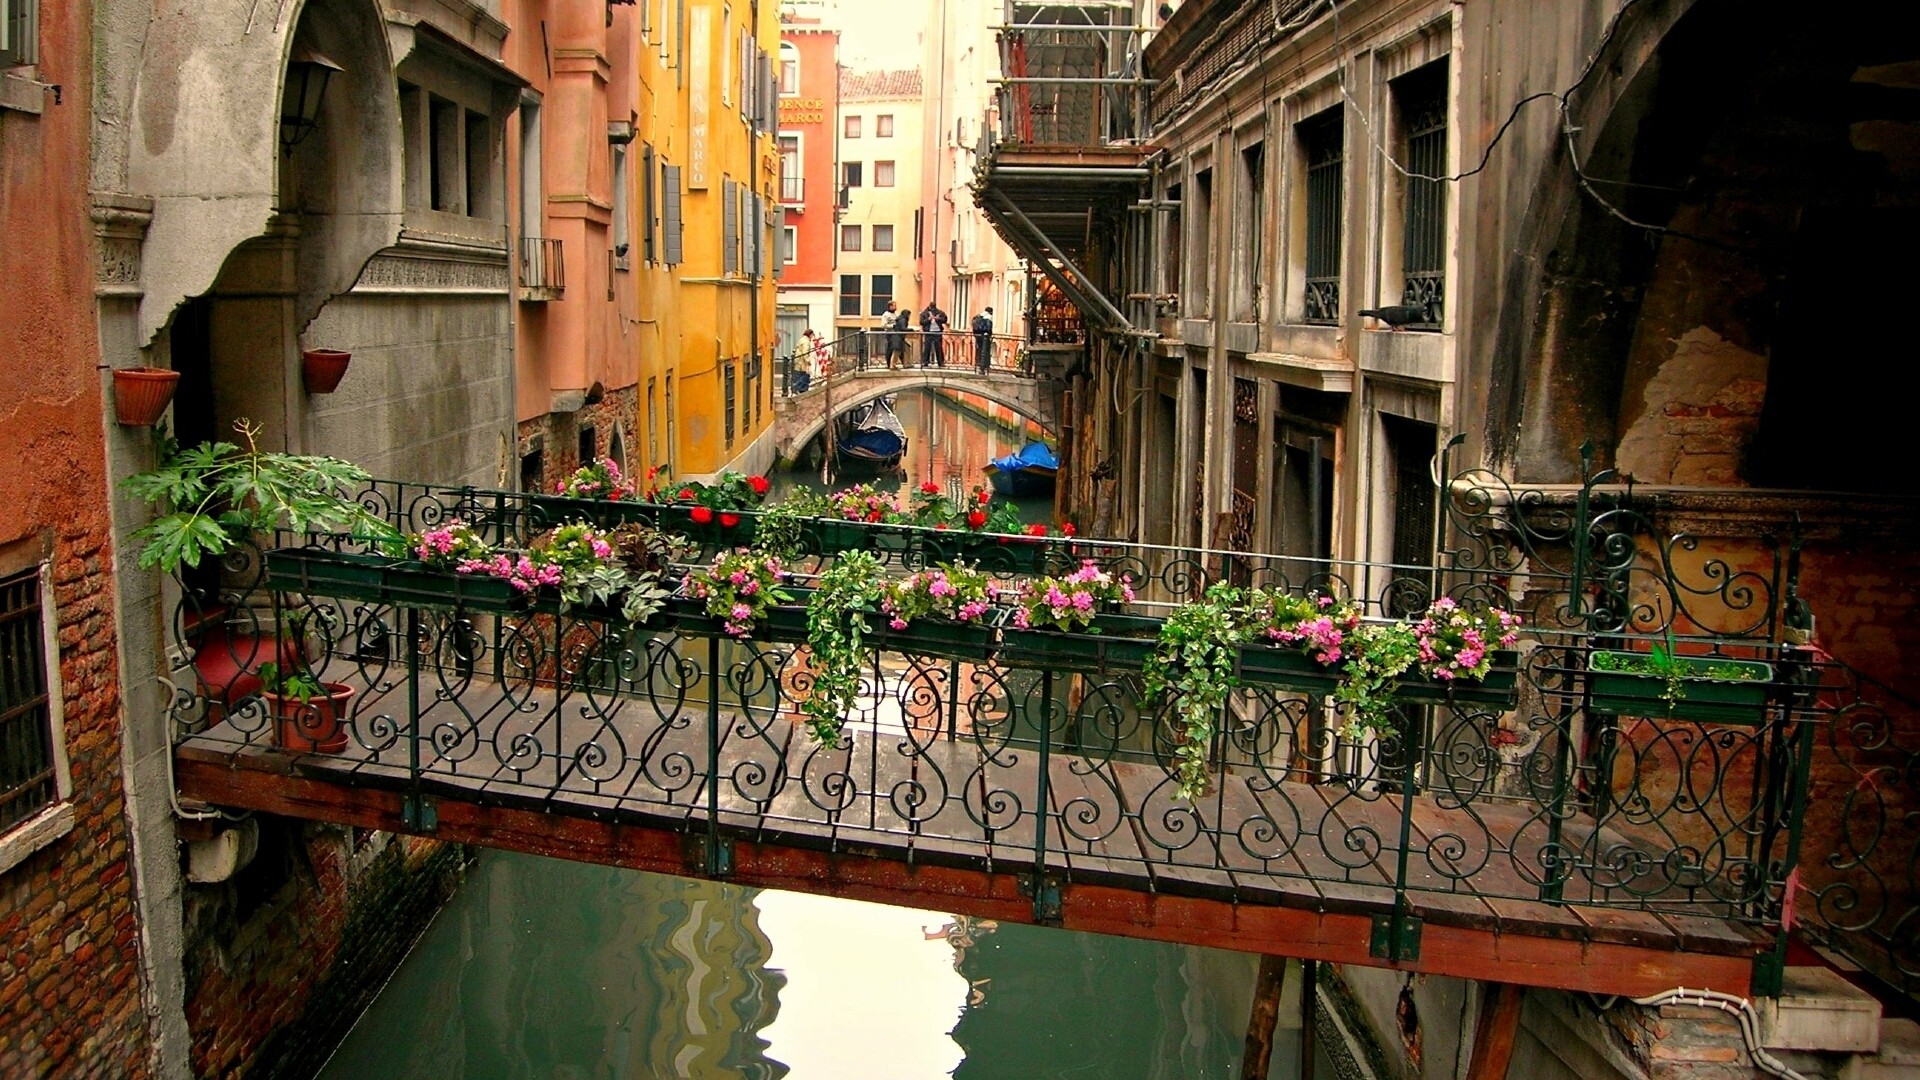 General 1920x1080 cityscape architecture town building Venice Italy water bridge old building house window flowers boat reflection canal